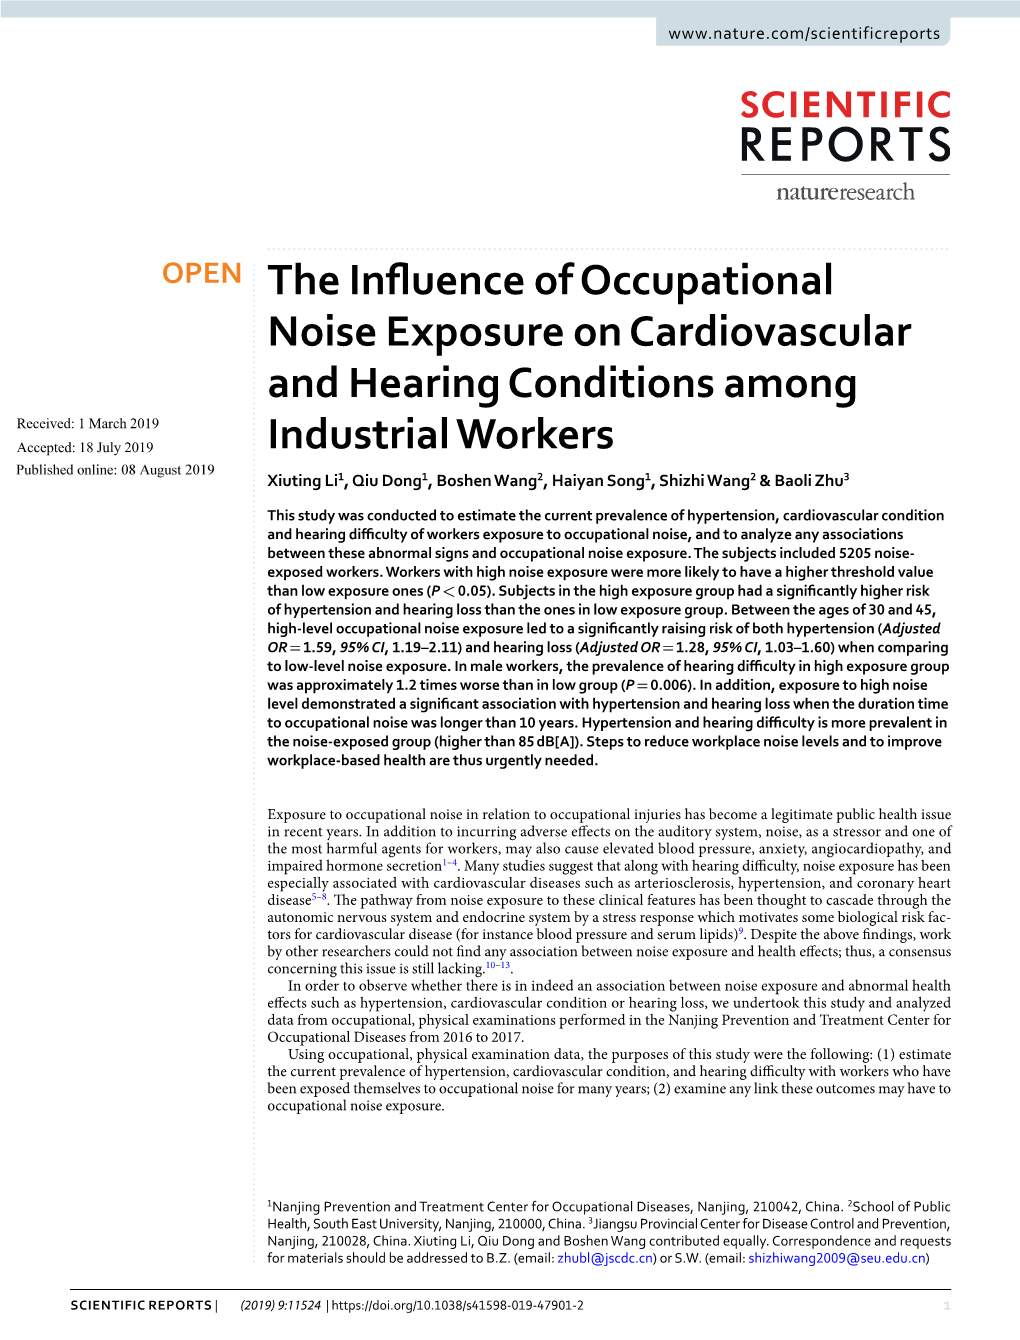 The Influence of Occupational Noise Exposure on Cardiovascular and Hearing Conditions Among Industrial Workers